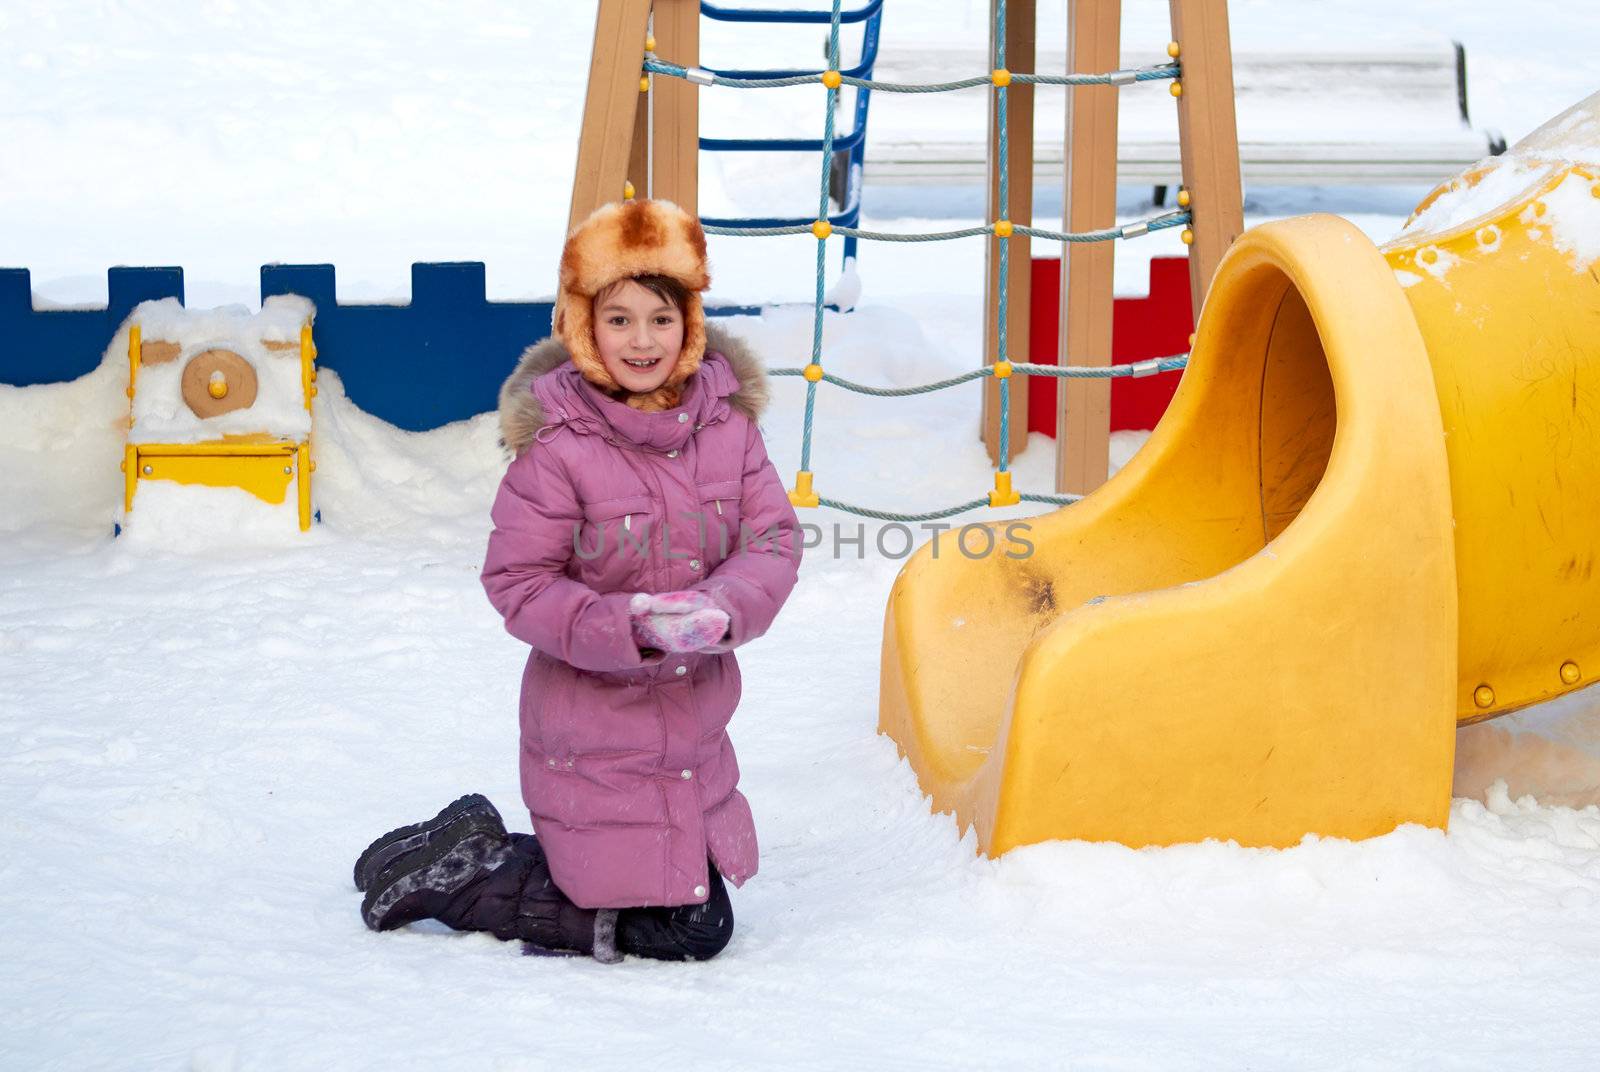 The girl at a childrens play area in winter